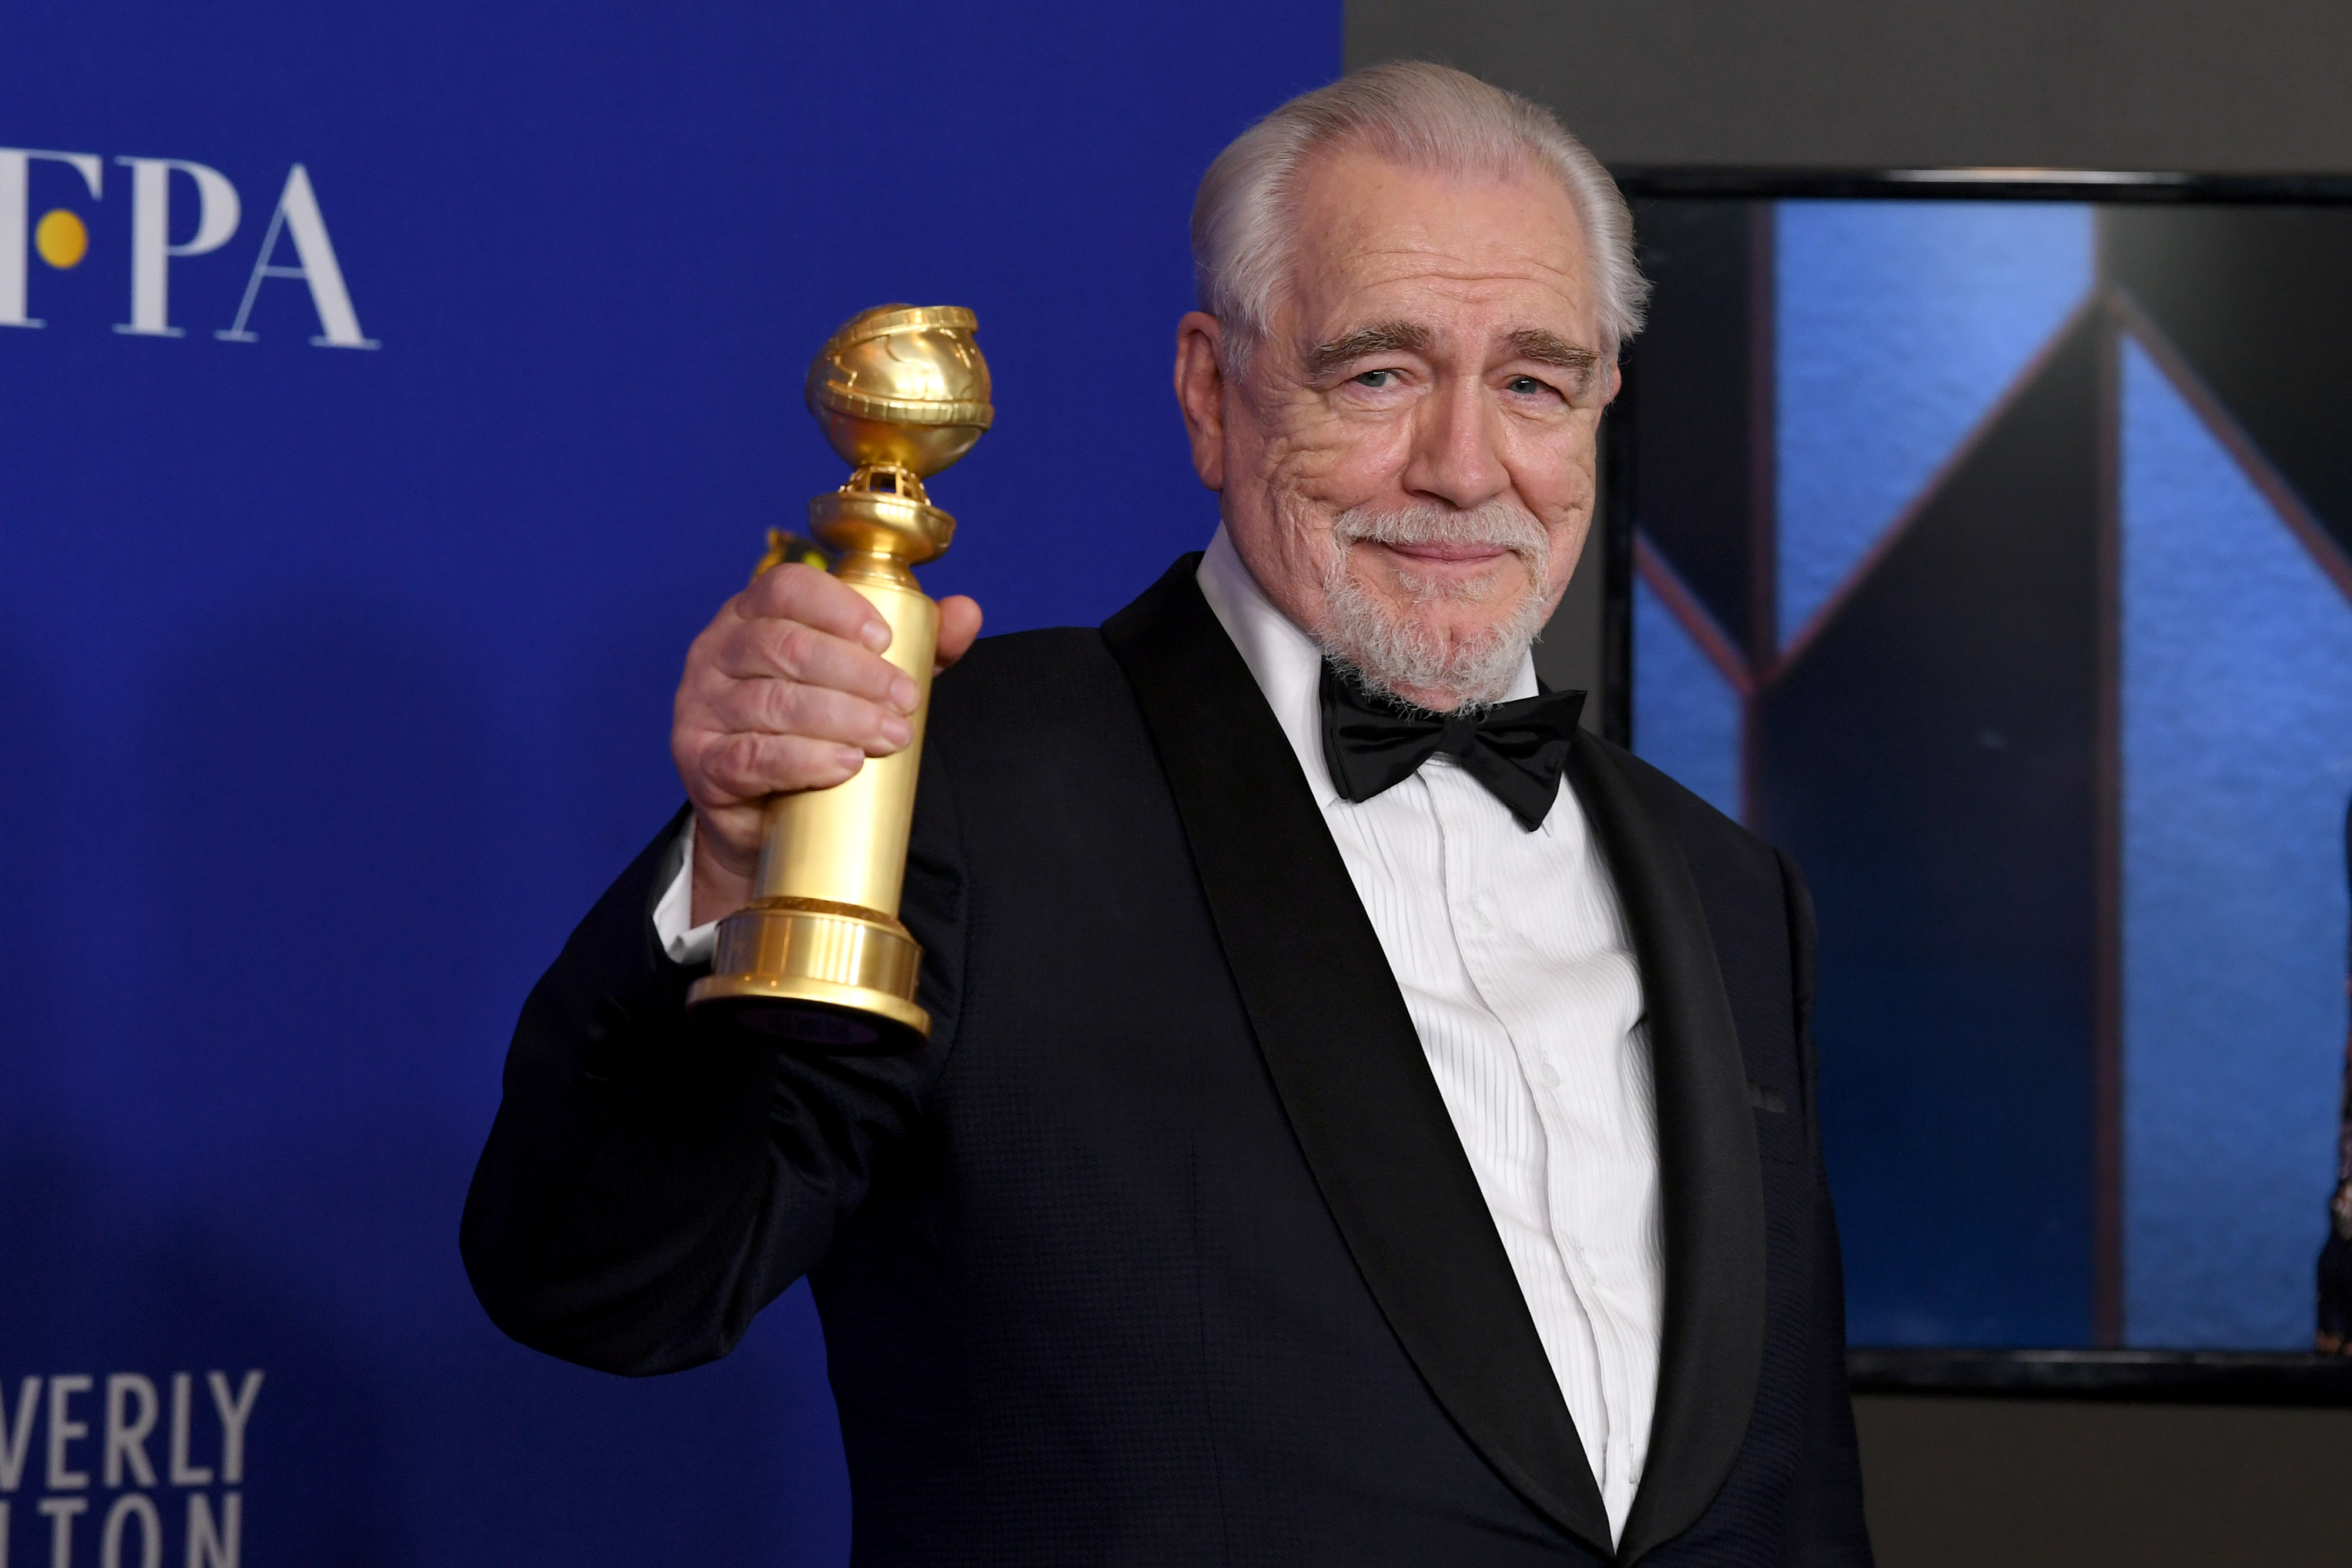 Succession cast member Brian Cox wears a tuxedo and holds a Golden Globe award.